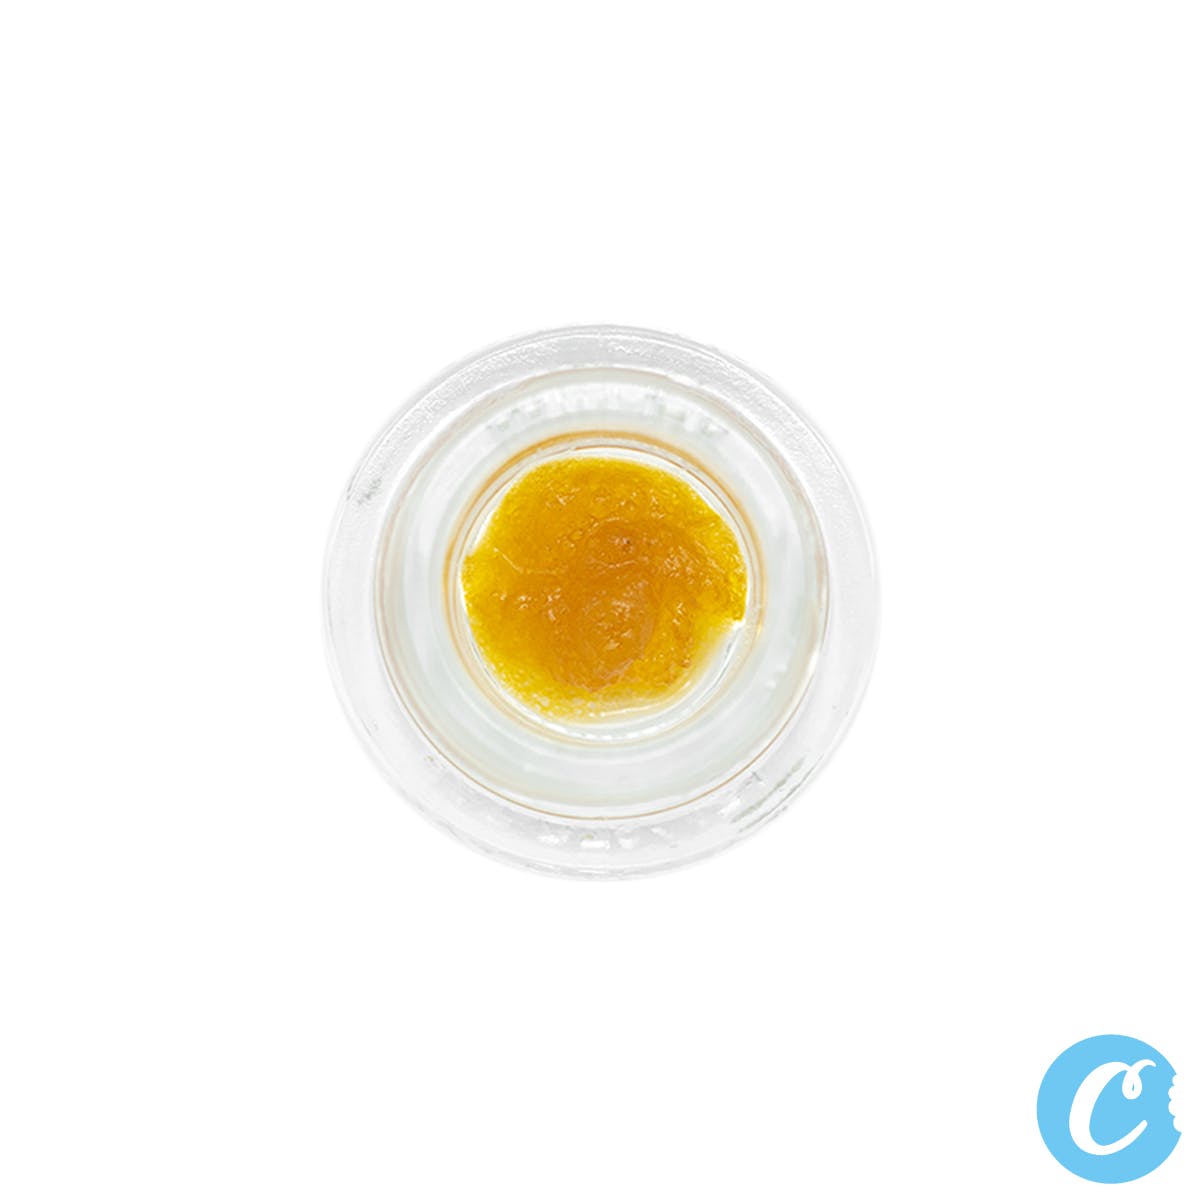 FIELD EXTRACTS LIVE RESIN - Wedding Cake